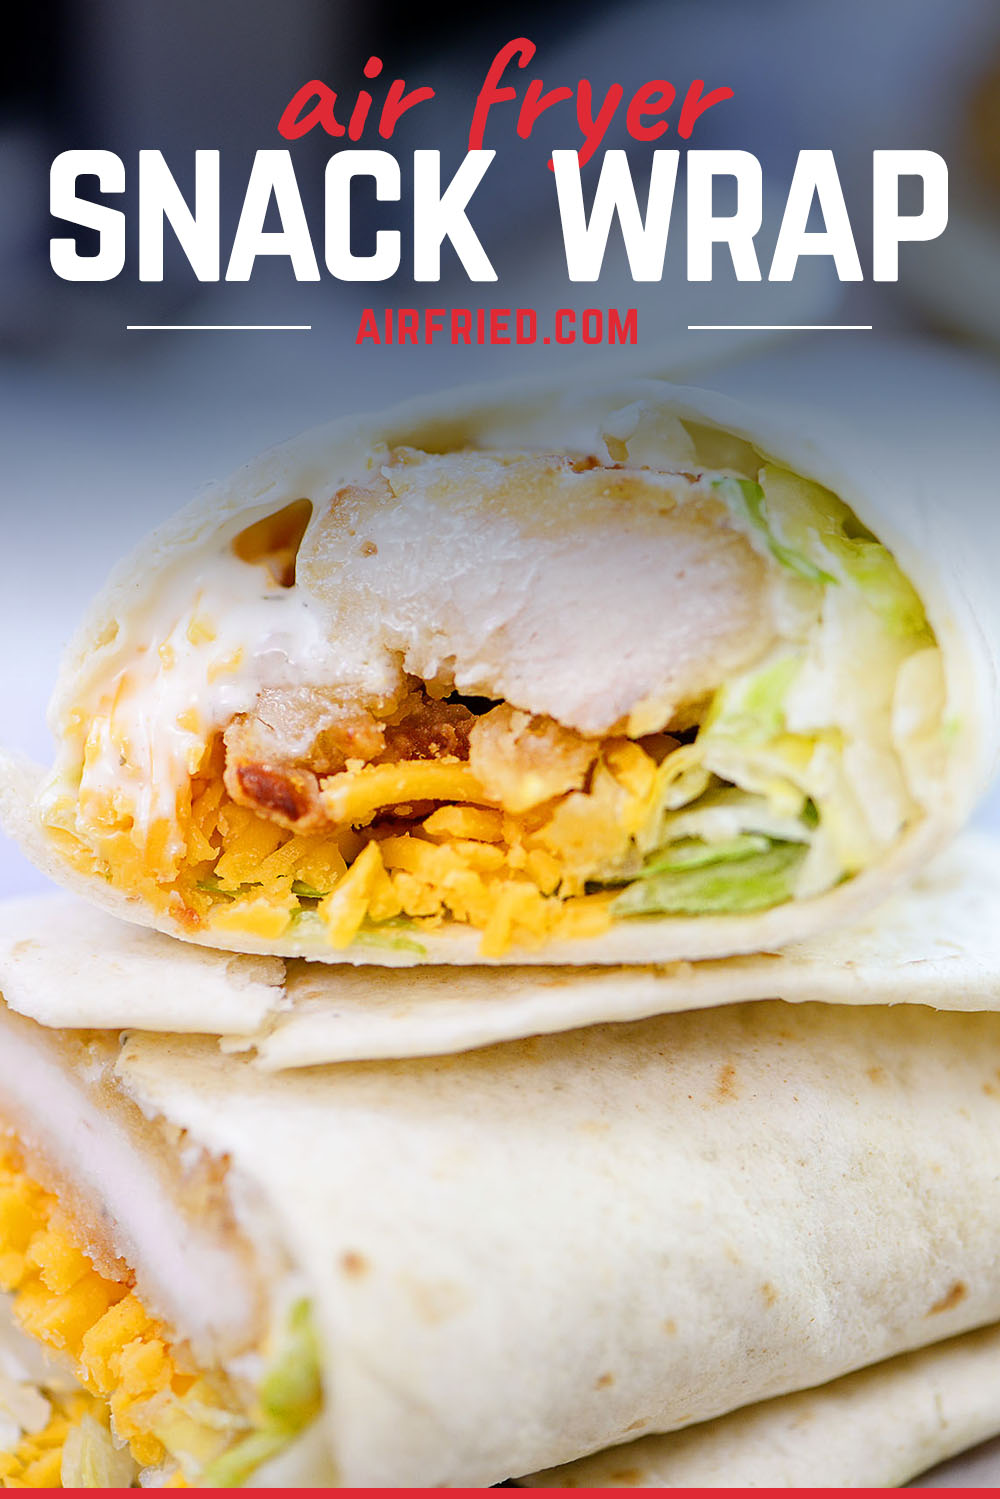 These chicken snack wraps are inspired by the popular fast food option, but cooked in the air fryer!